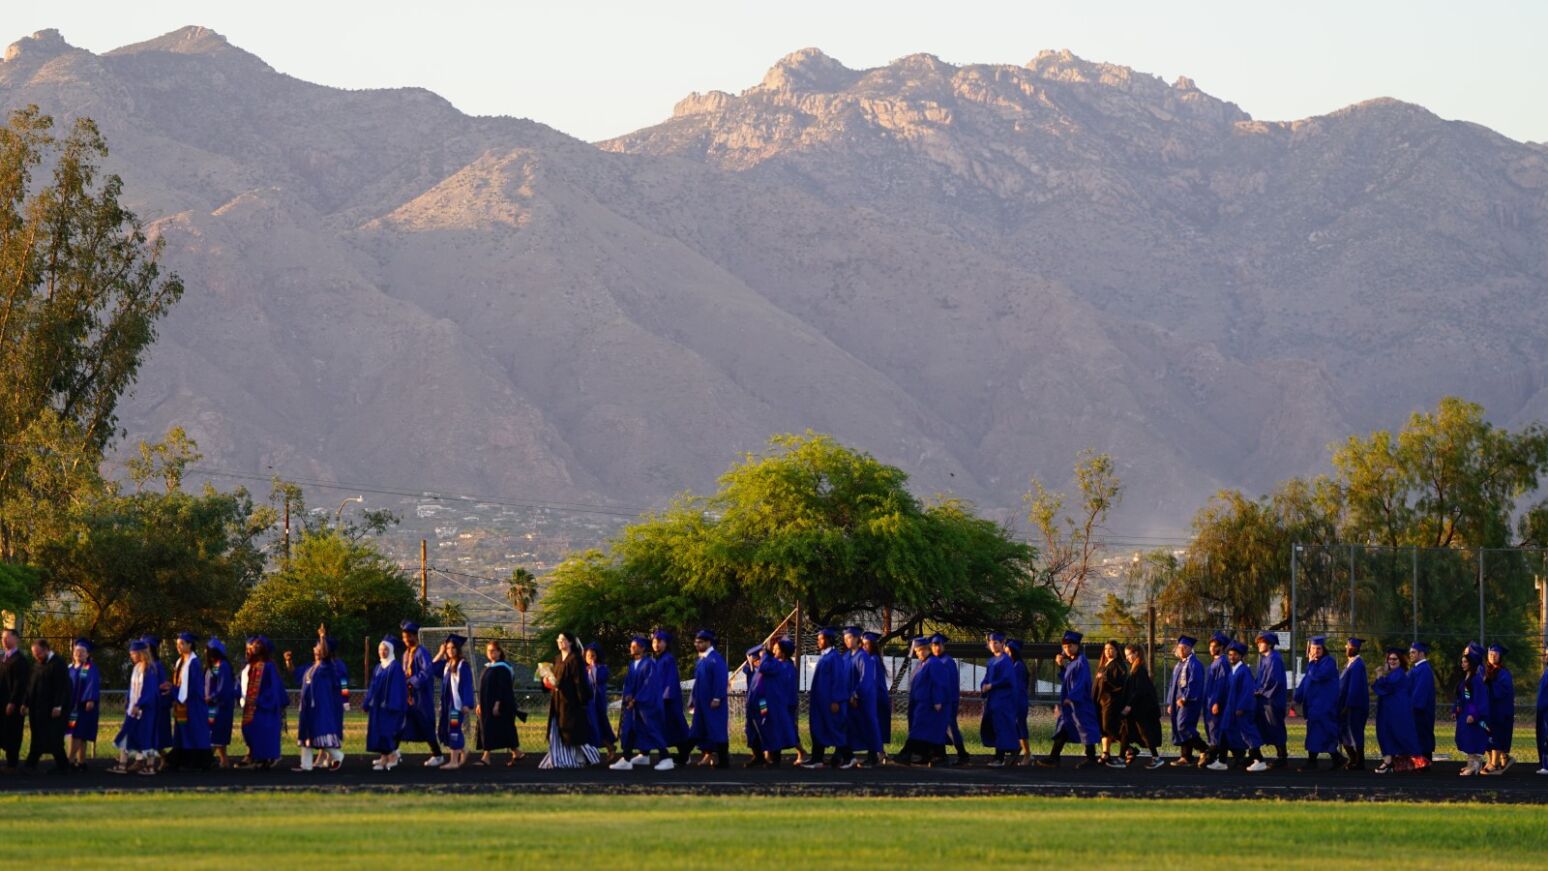 Catalina grads walk around the track with the Catalina Mountains in the background